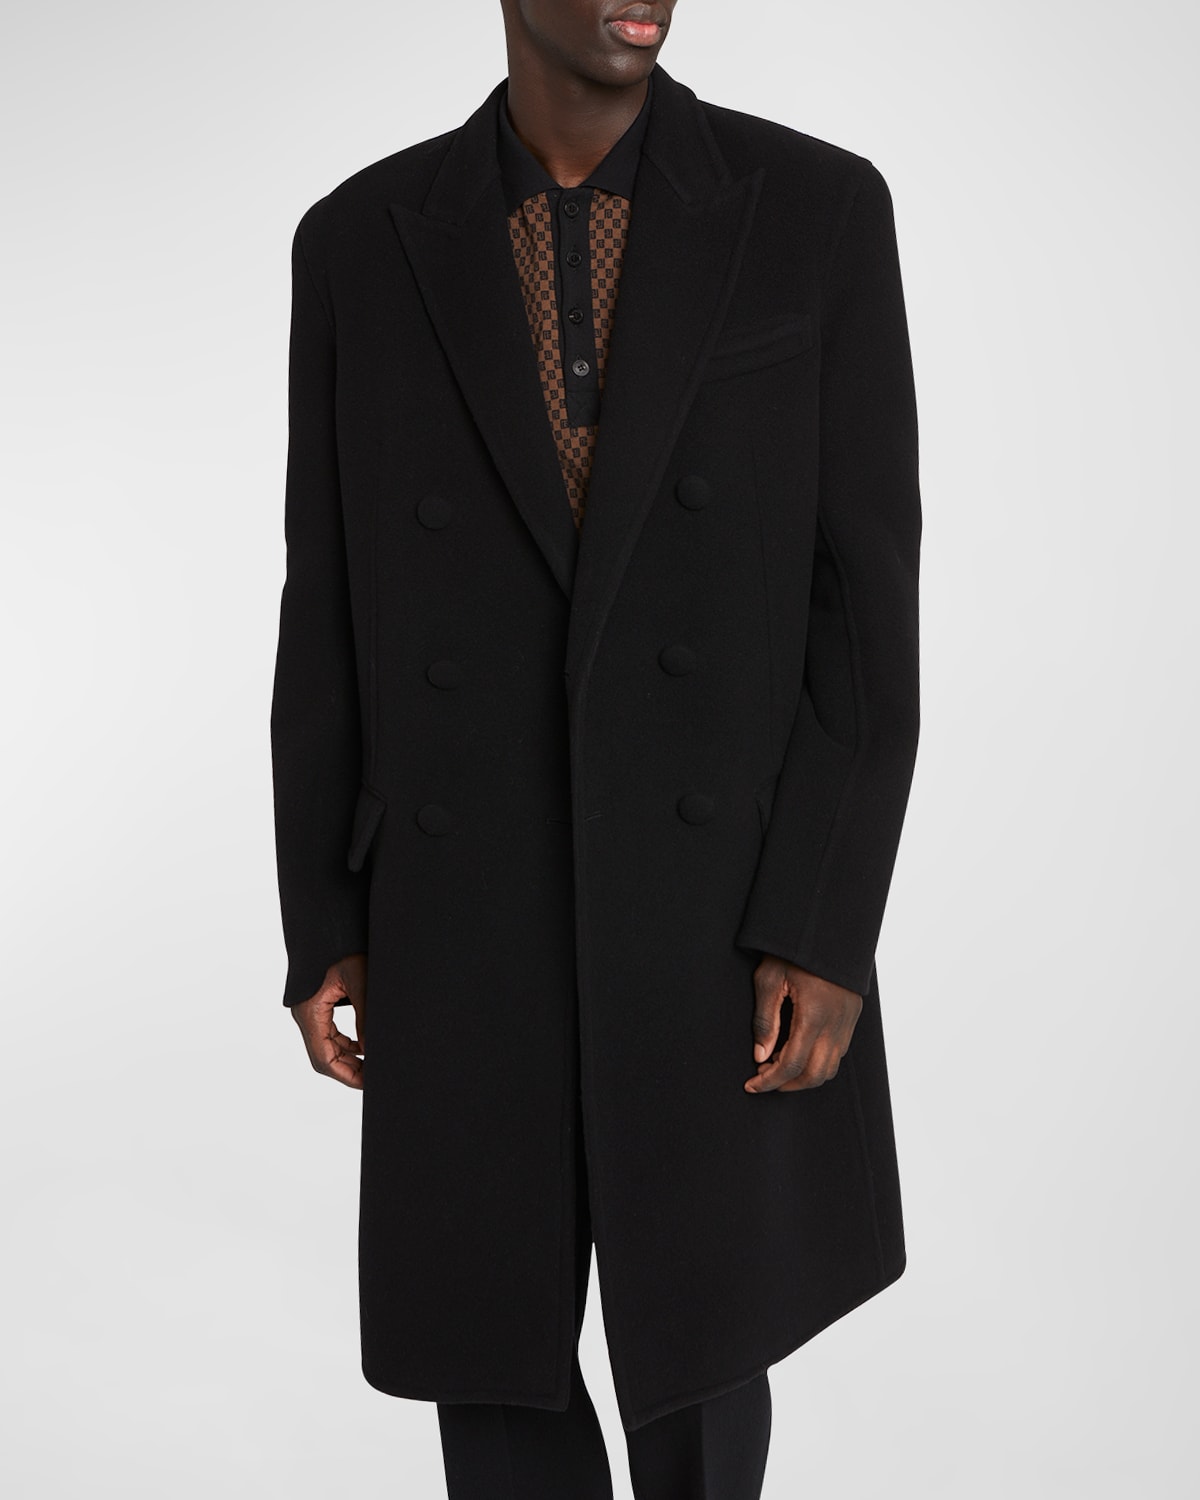 Balmain Men's Double-face Wool And Cashmere Overcoat In Black